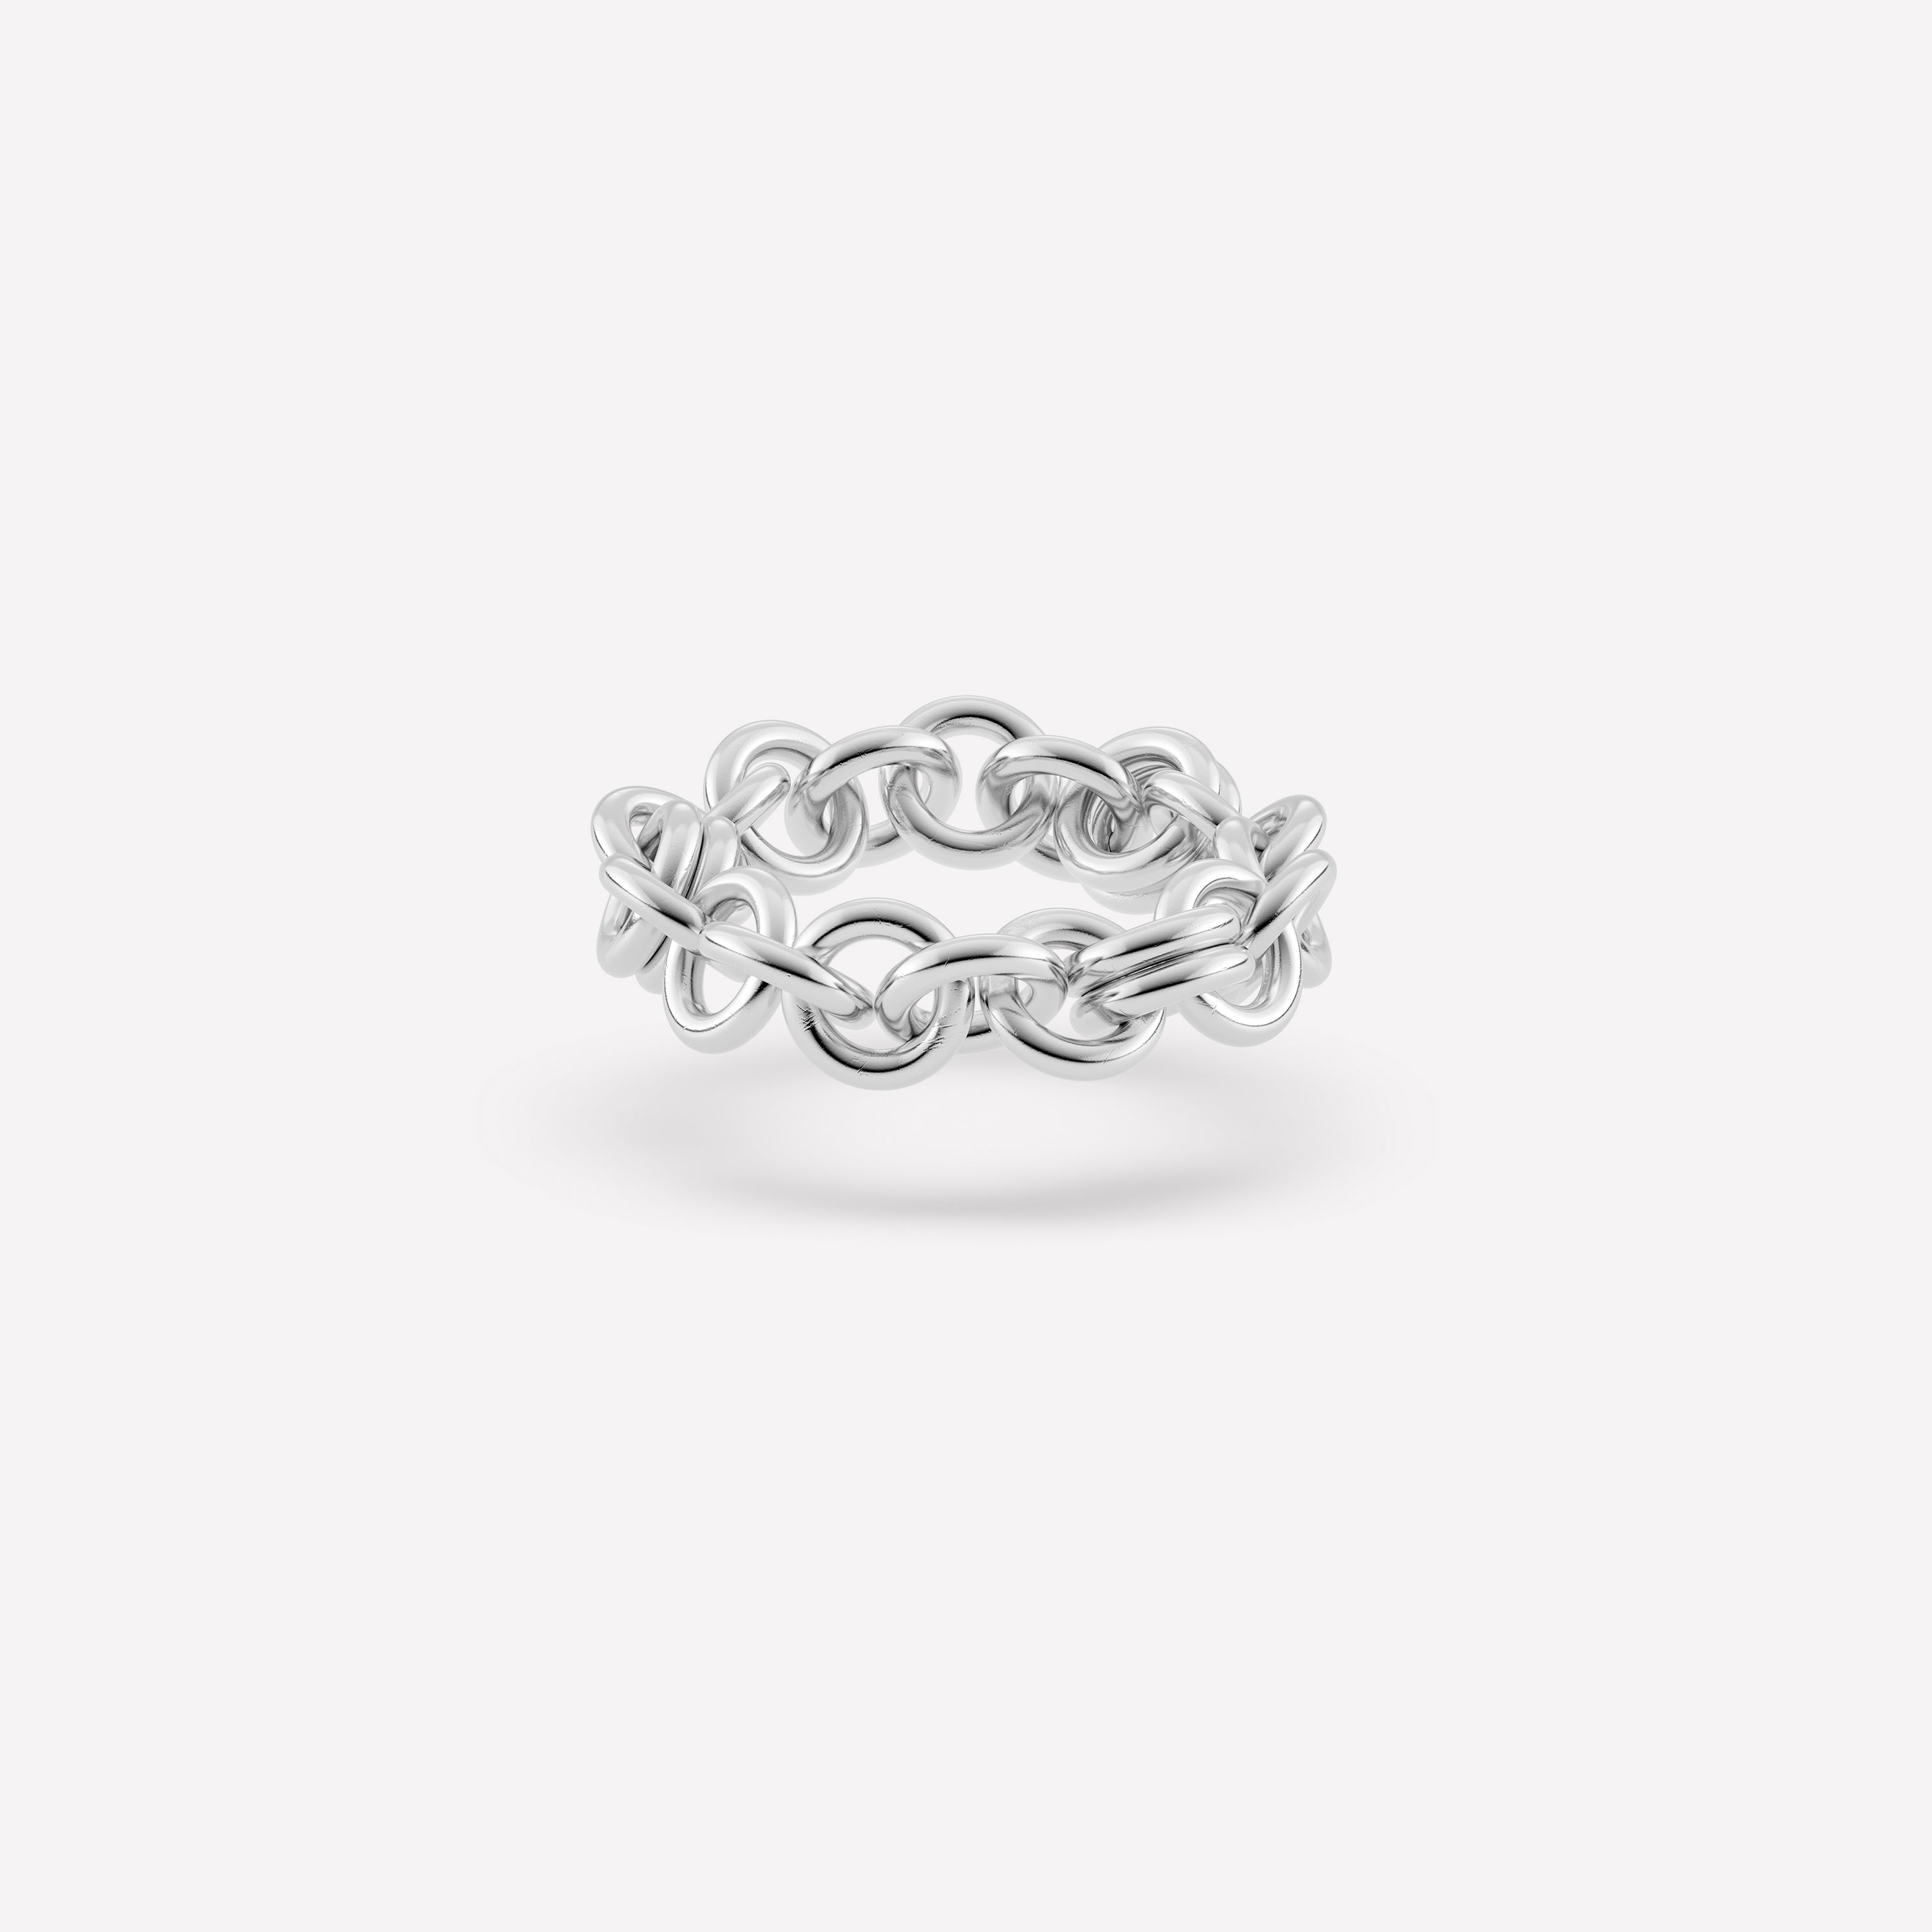 Wholesale Indian Silver Finger Chain Ring| Alibaba.com